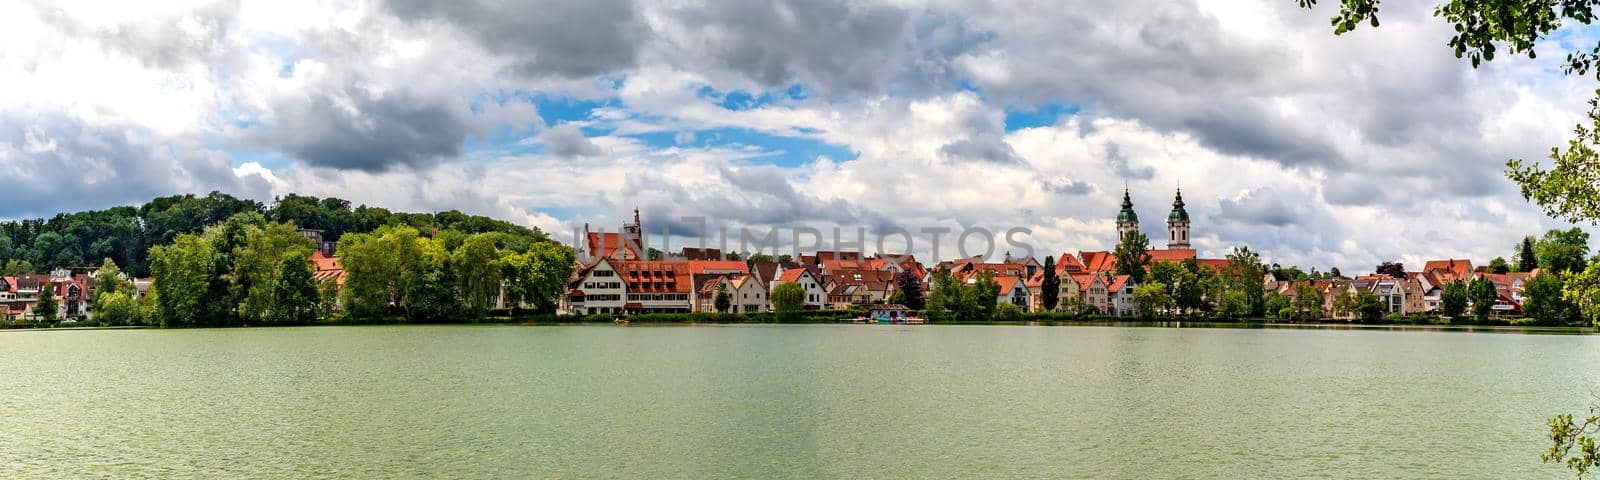 Stunning panoramic view of the town and lake in Bad Waldsee, Germany by EdVal